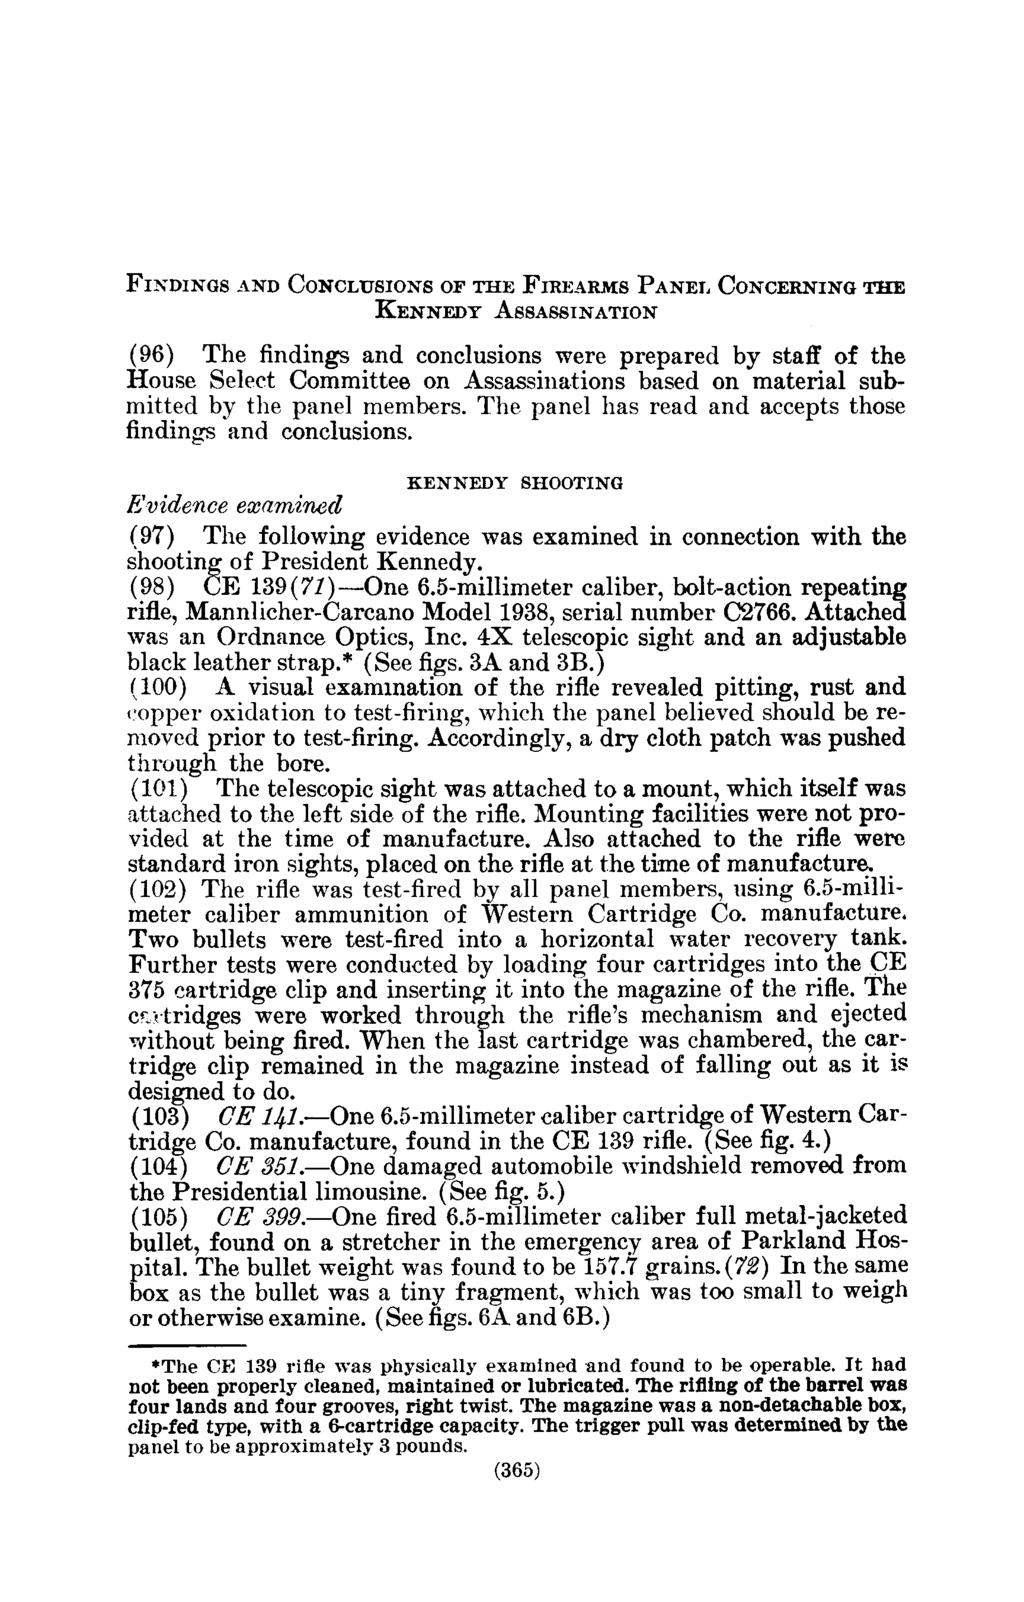 FINDINGS AND CONCLUSIONS OF THE FIREARMS PANEL CONCERNING THE KENNEDY ASSASSINATION (96) The findings and conclusions were prepared by staff of the House Select Committee on Assassinations based on